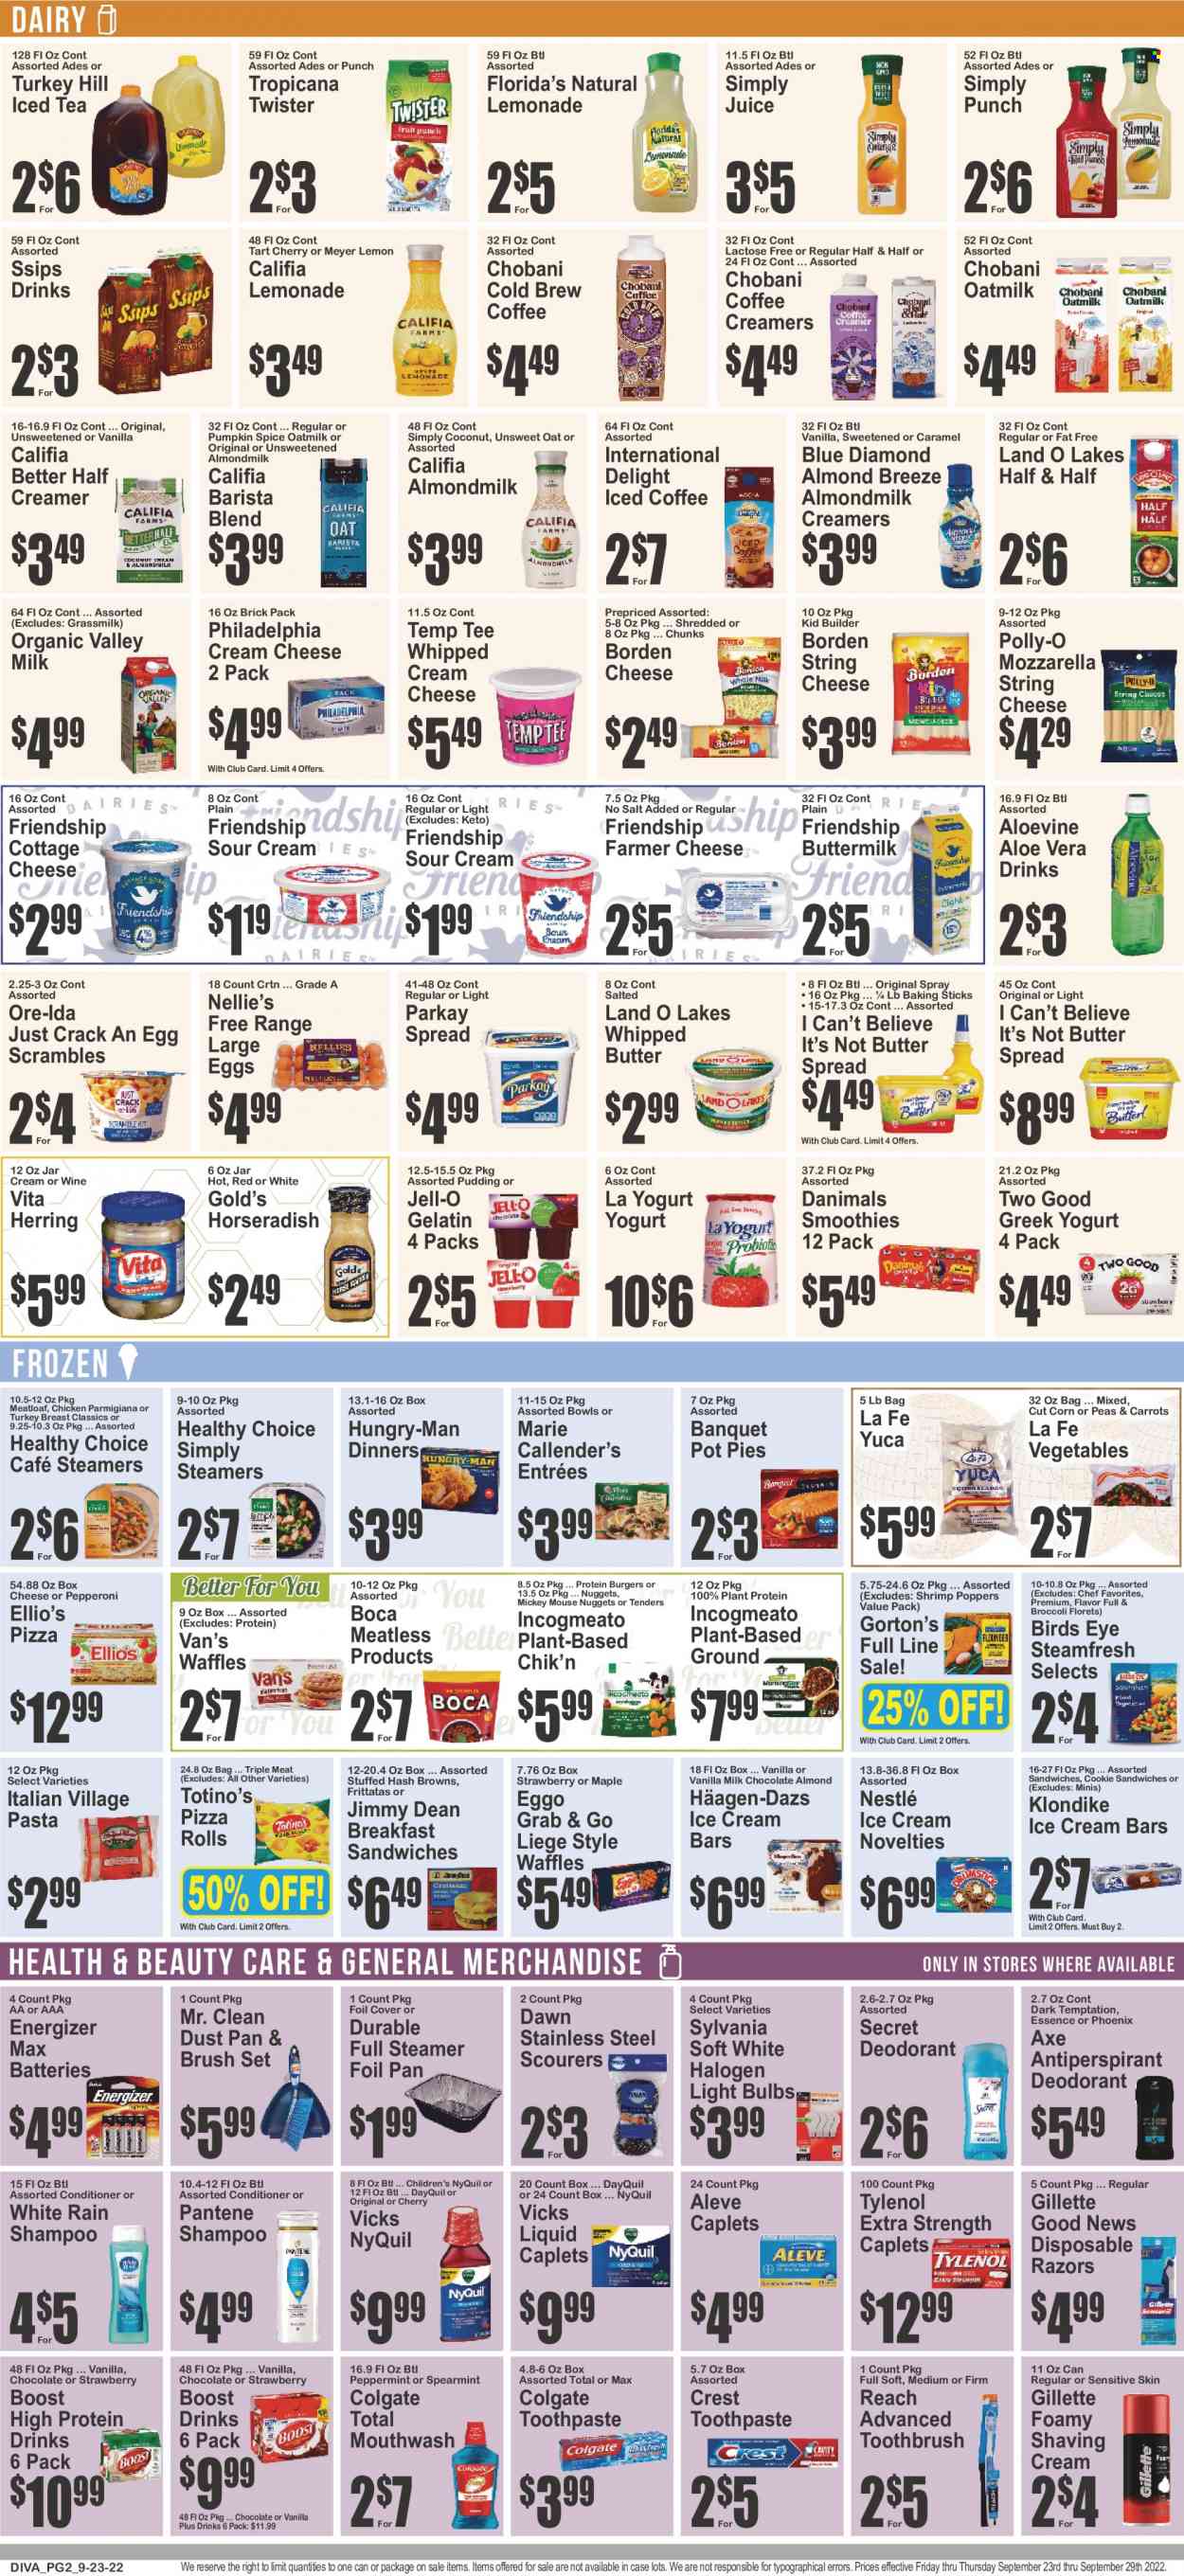 thumbnail - Brooklyn Fare Flyer - 09/23/2022 - 09/29/2022 - Sales products - pizza rolls, pot pie, waffles, broccoli, carrots, corn, horseradish, herring, shrimps, Gorton's, pizza, nuggets, hamburger, pasta, meatloaf, Bird's Eye, Healthy Choice, Marie Callender's, Jimmy Dean, cottage cheese, farmer cheese, string cheese, Philadelphia, greek yoghurt, pudding, yoghurt, Chobani, Danimals, almond milk, buttermilk, protein drink, Almond Breeze, oat milk, large eggs, whipped butter, I Can't Believe It's Not Butter, sour cream, whipped cream, creamer, ice cream, ice cream bars, Häagen-Dazs, parmigiana, hash browns, Ore-Ida, Nestlé, Florida's Natural, Jell-O, plant protein, spice, Blue Diamond, lemonade, juice, ice tea, Tropicana Twister, smoothie, iced coffee, Boost, wine, turkey breast, shampoo, Colgate, toothbrush, toothpaste, mouthwash, Crest, conditioner, Pantene, anti-perspirant, deodorant, Axe, Gillette, disposable razor, Vicks, dustpan & brush, battery, bulb, Energizer, light bulb, Sylvania, Aleve, DayQuil, Tylenol, NyQuil, Half and half. Page 2.